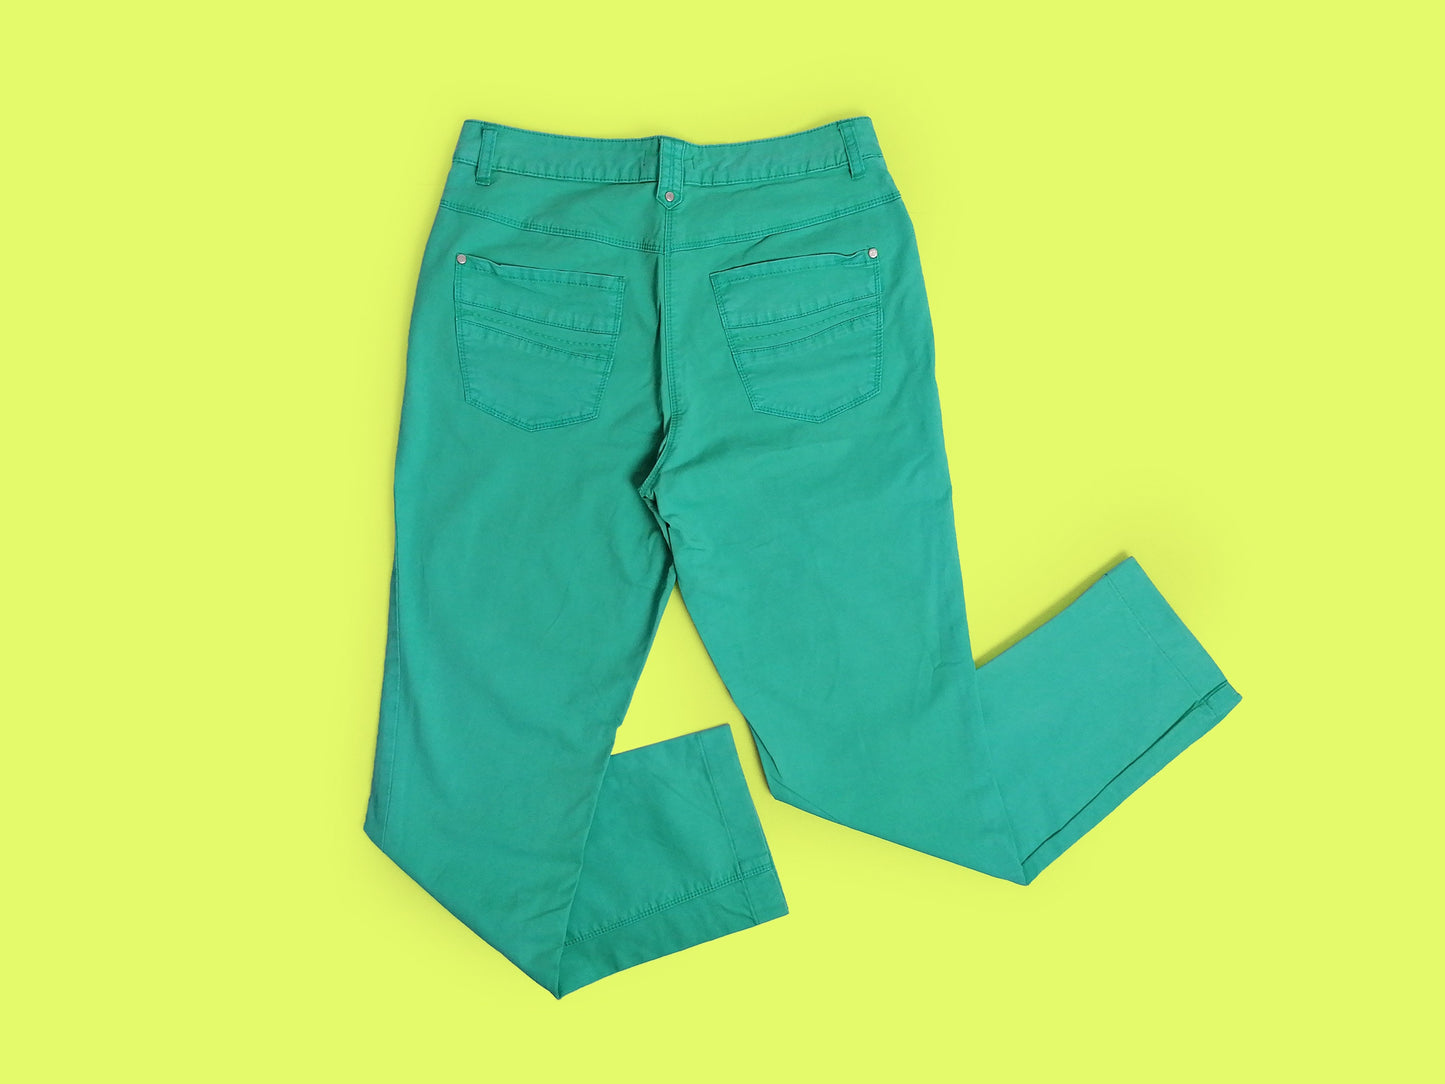 90's high-waist turquoise pants - size S-M